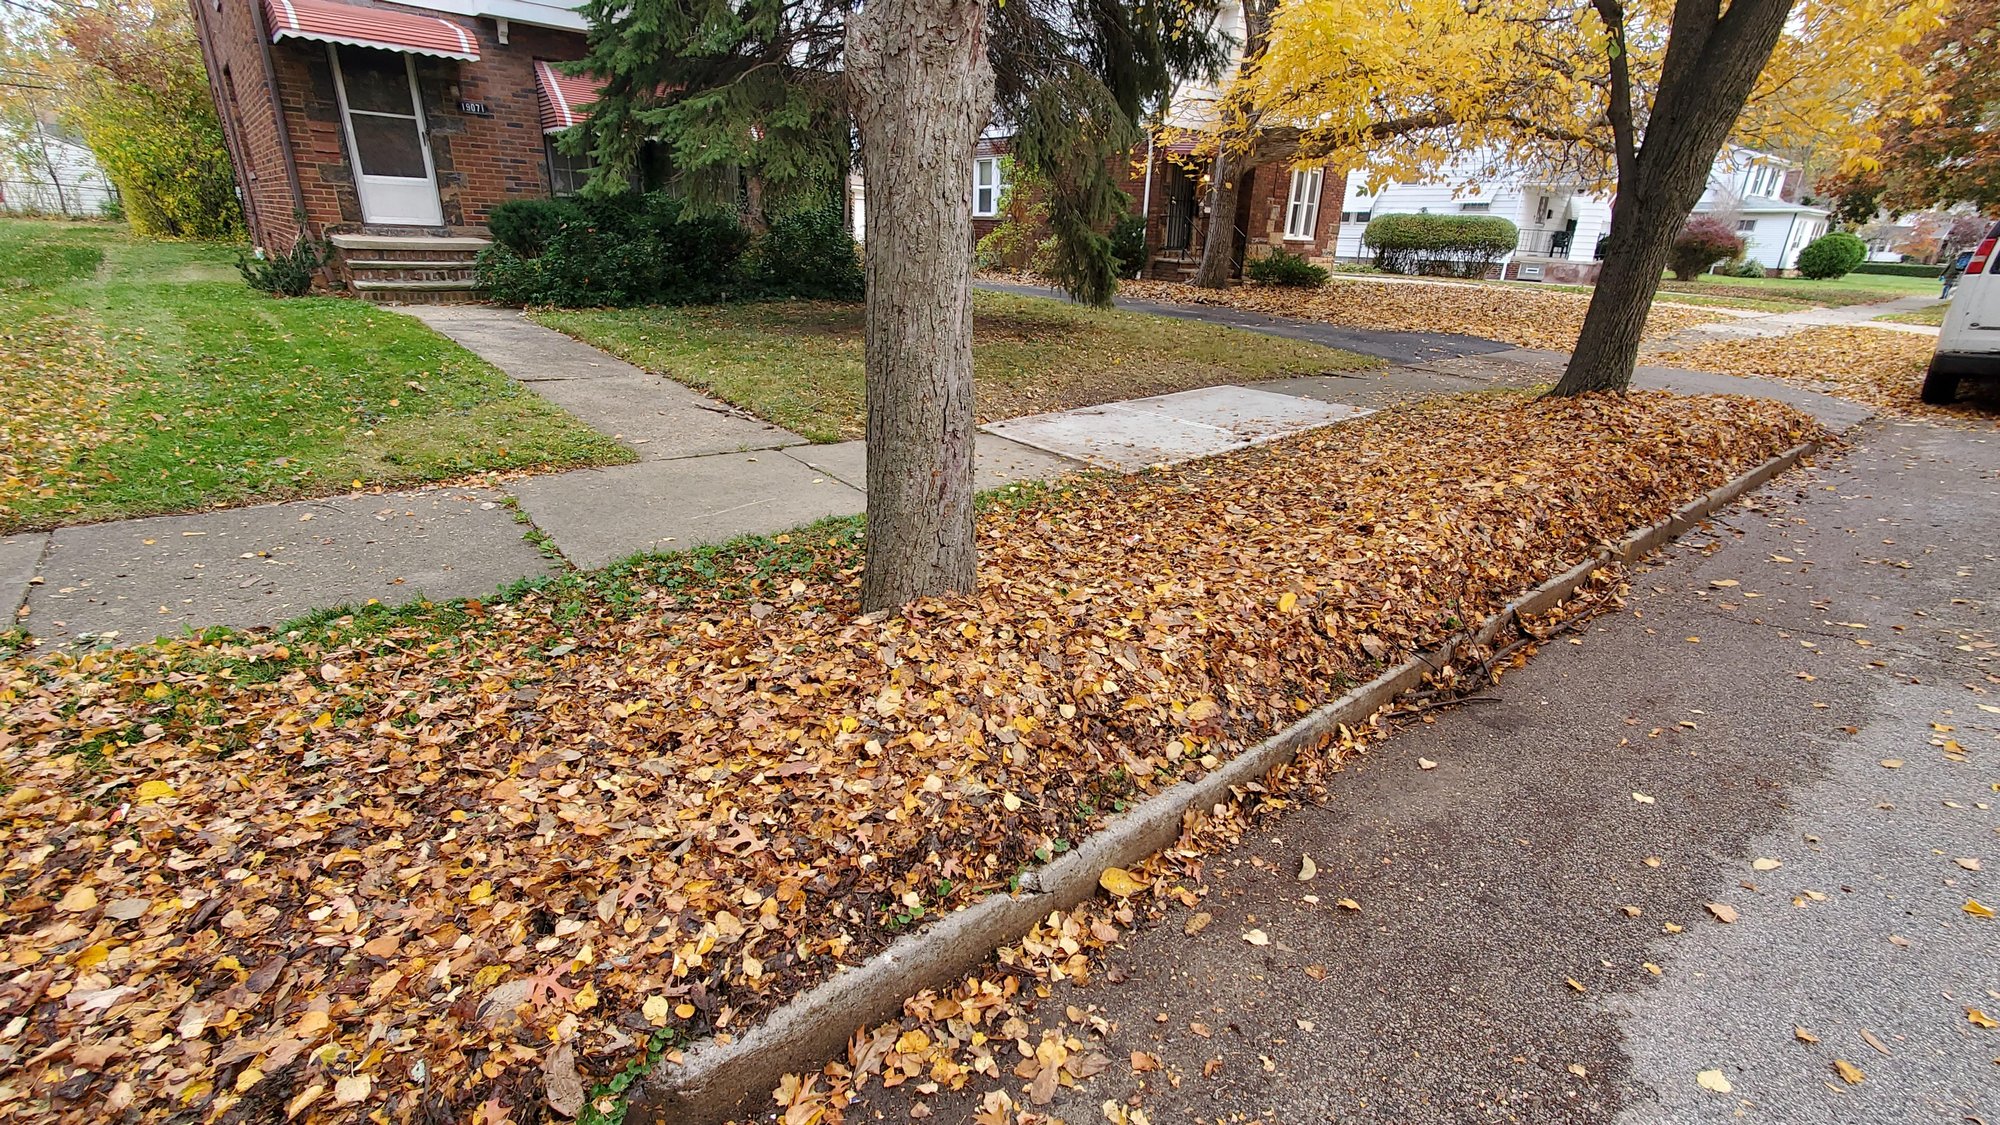 Picture of a Euclid, Oh front lawn after a fall leaf cleanup where the leaves were blown curbside for city pickup.